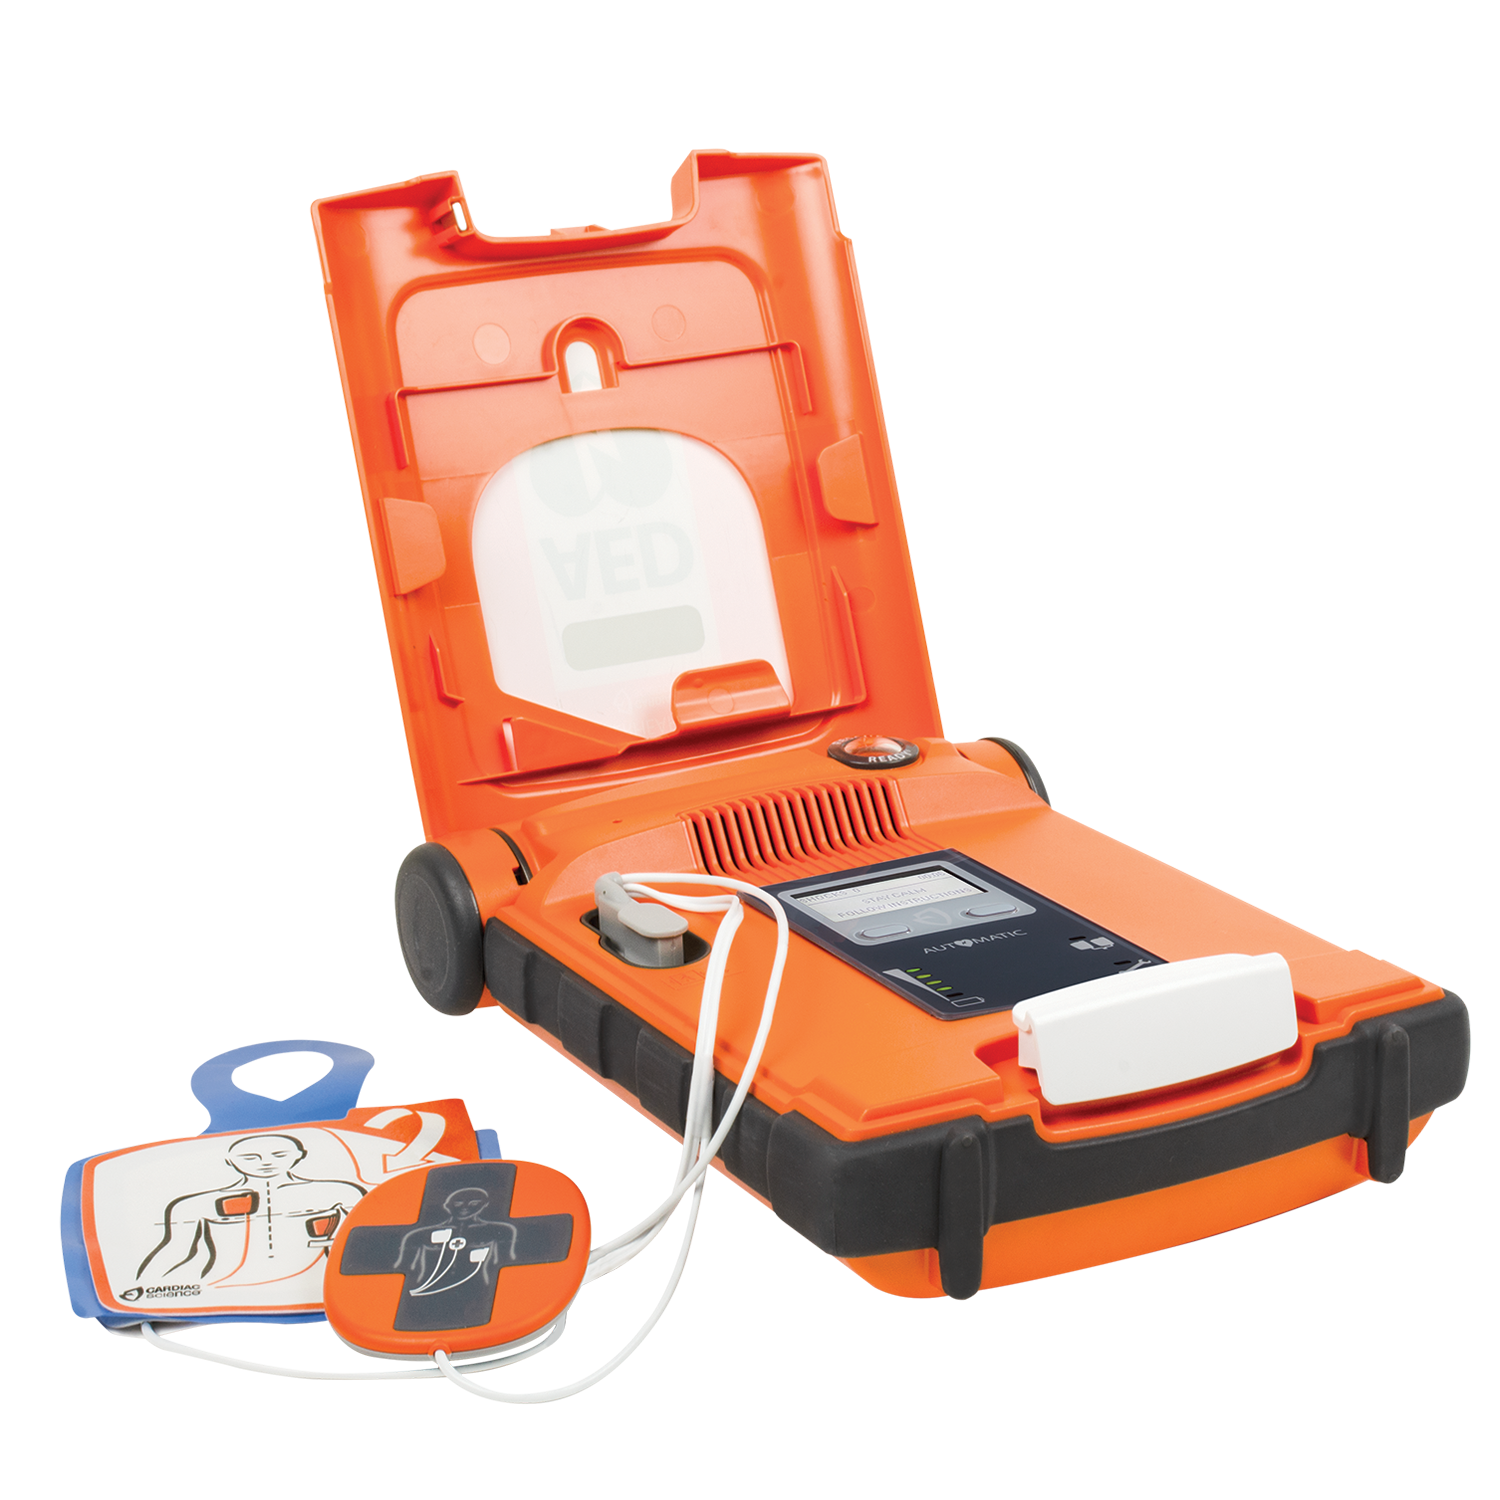 Powerheart G5 AED with ICPR